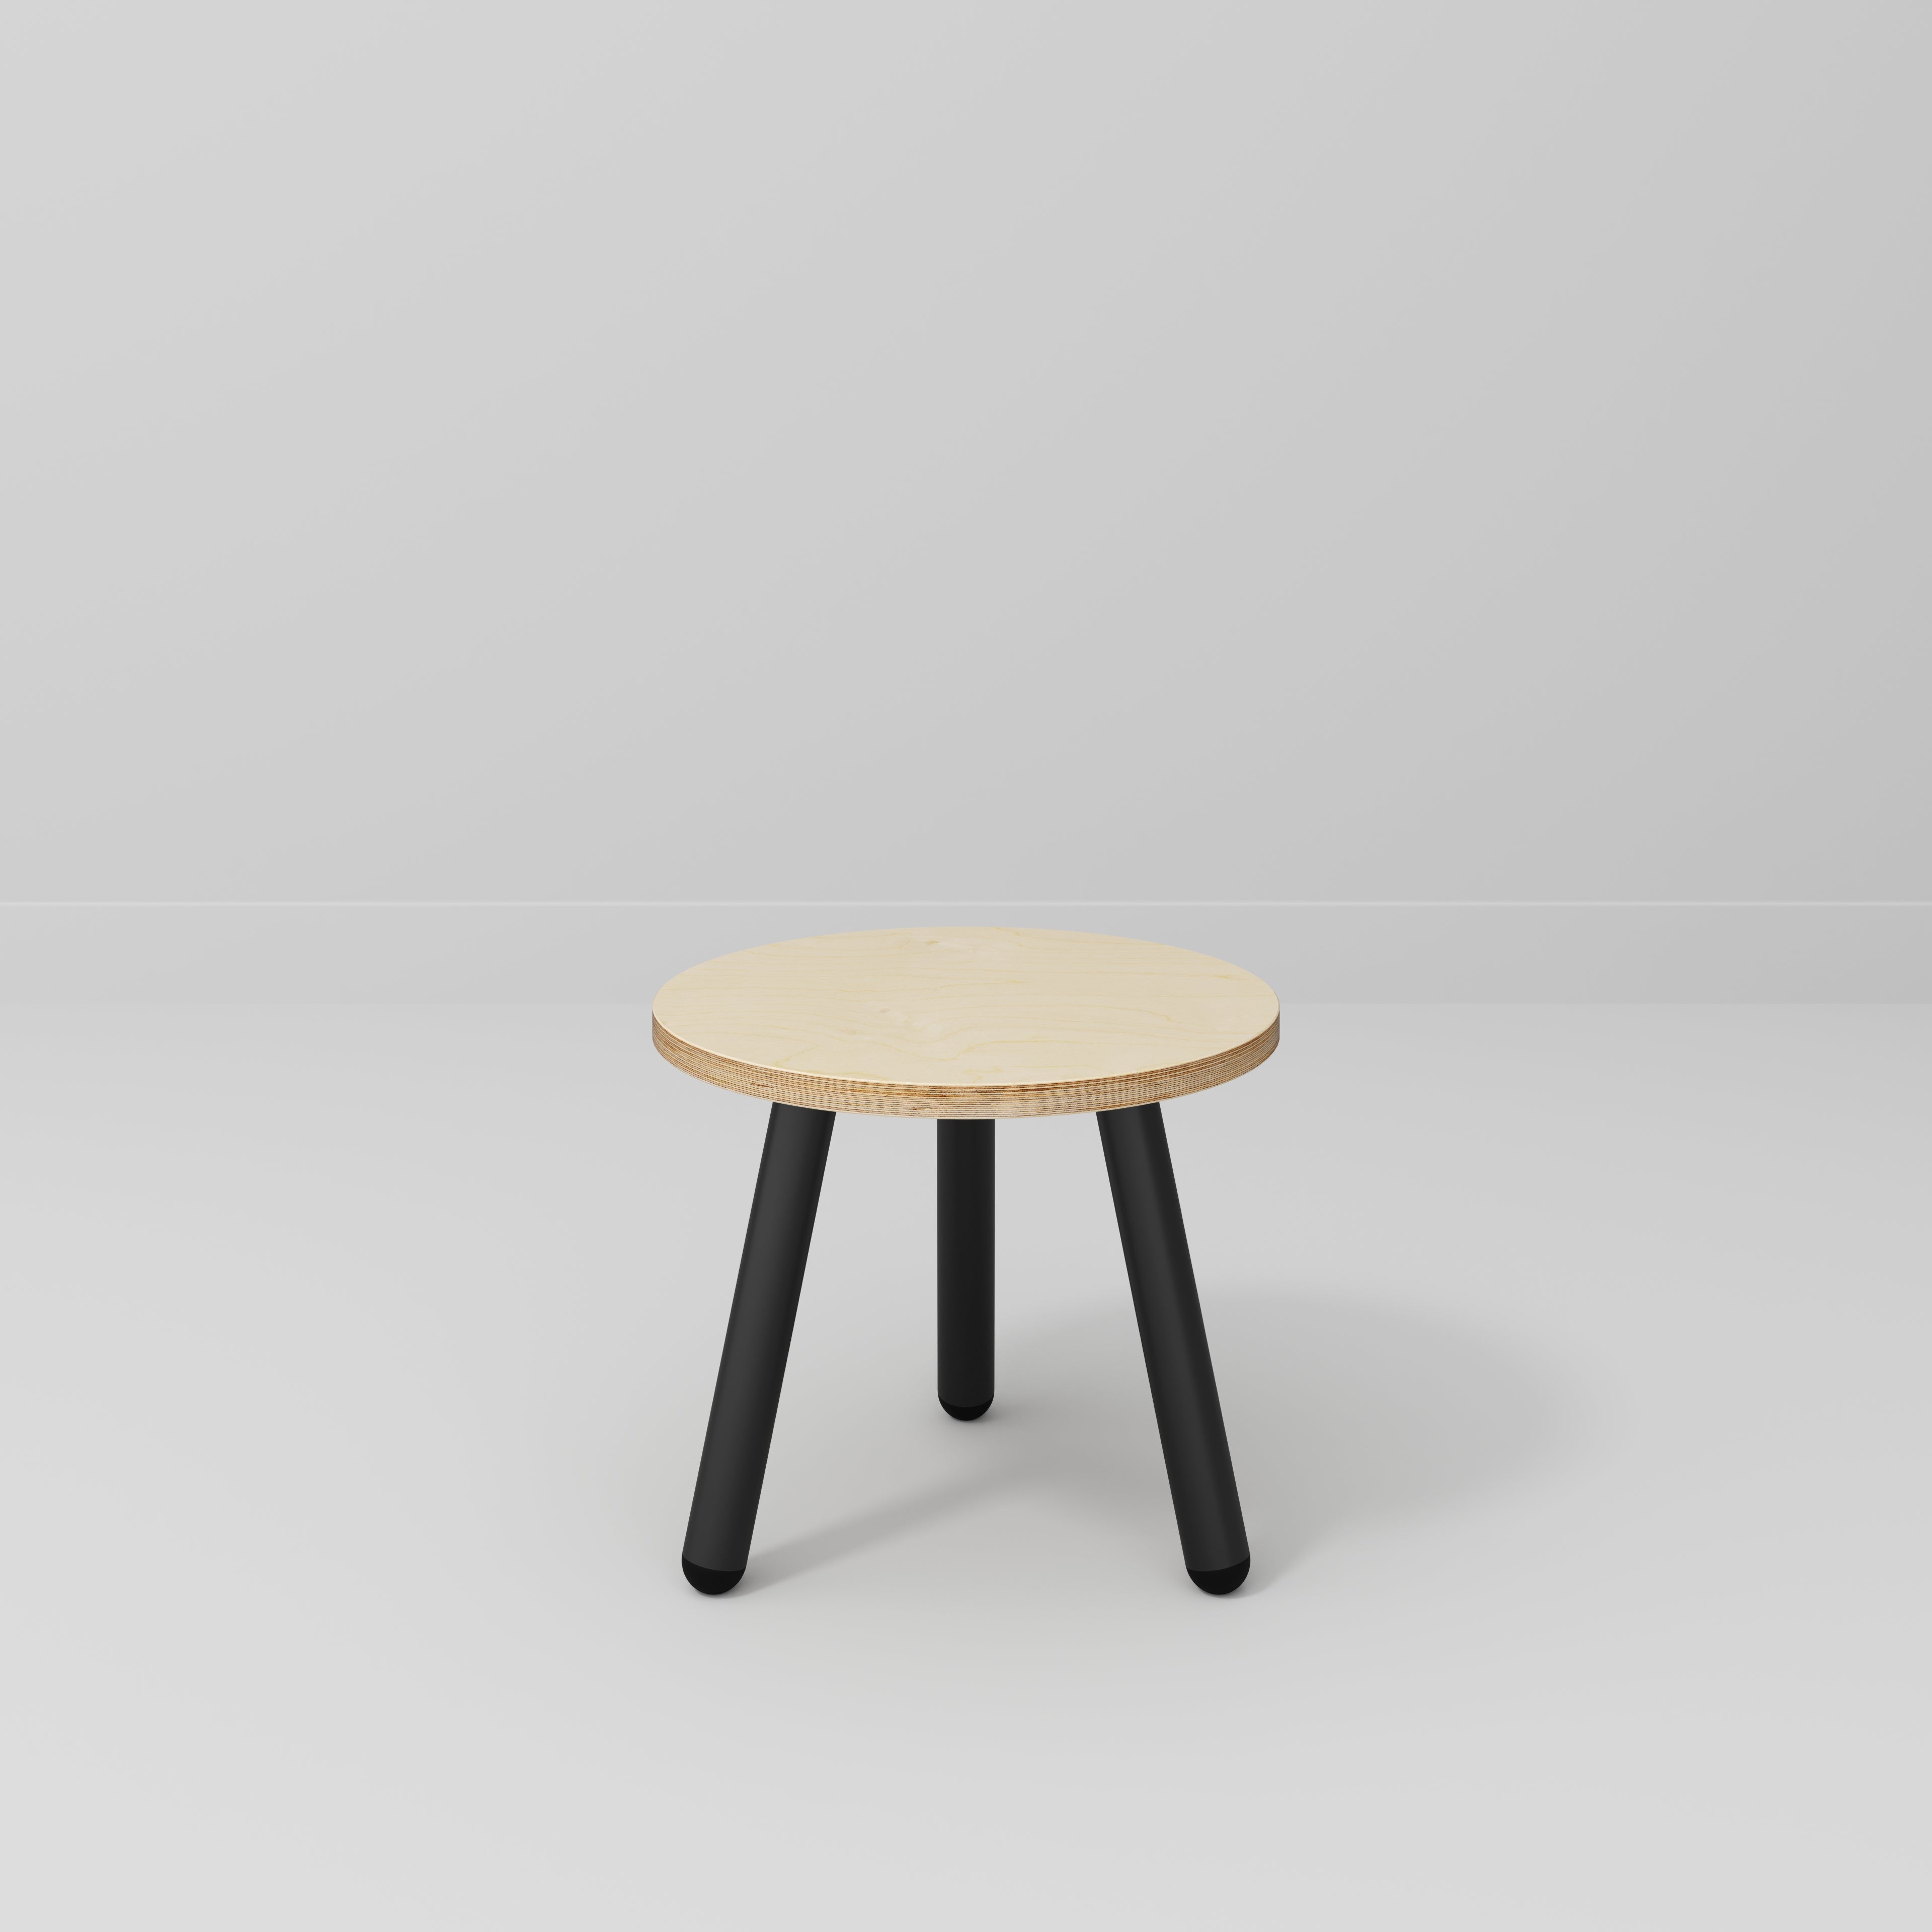 Custom Plywood Round Side Table with Round Single Pin Legs